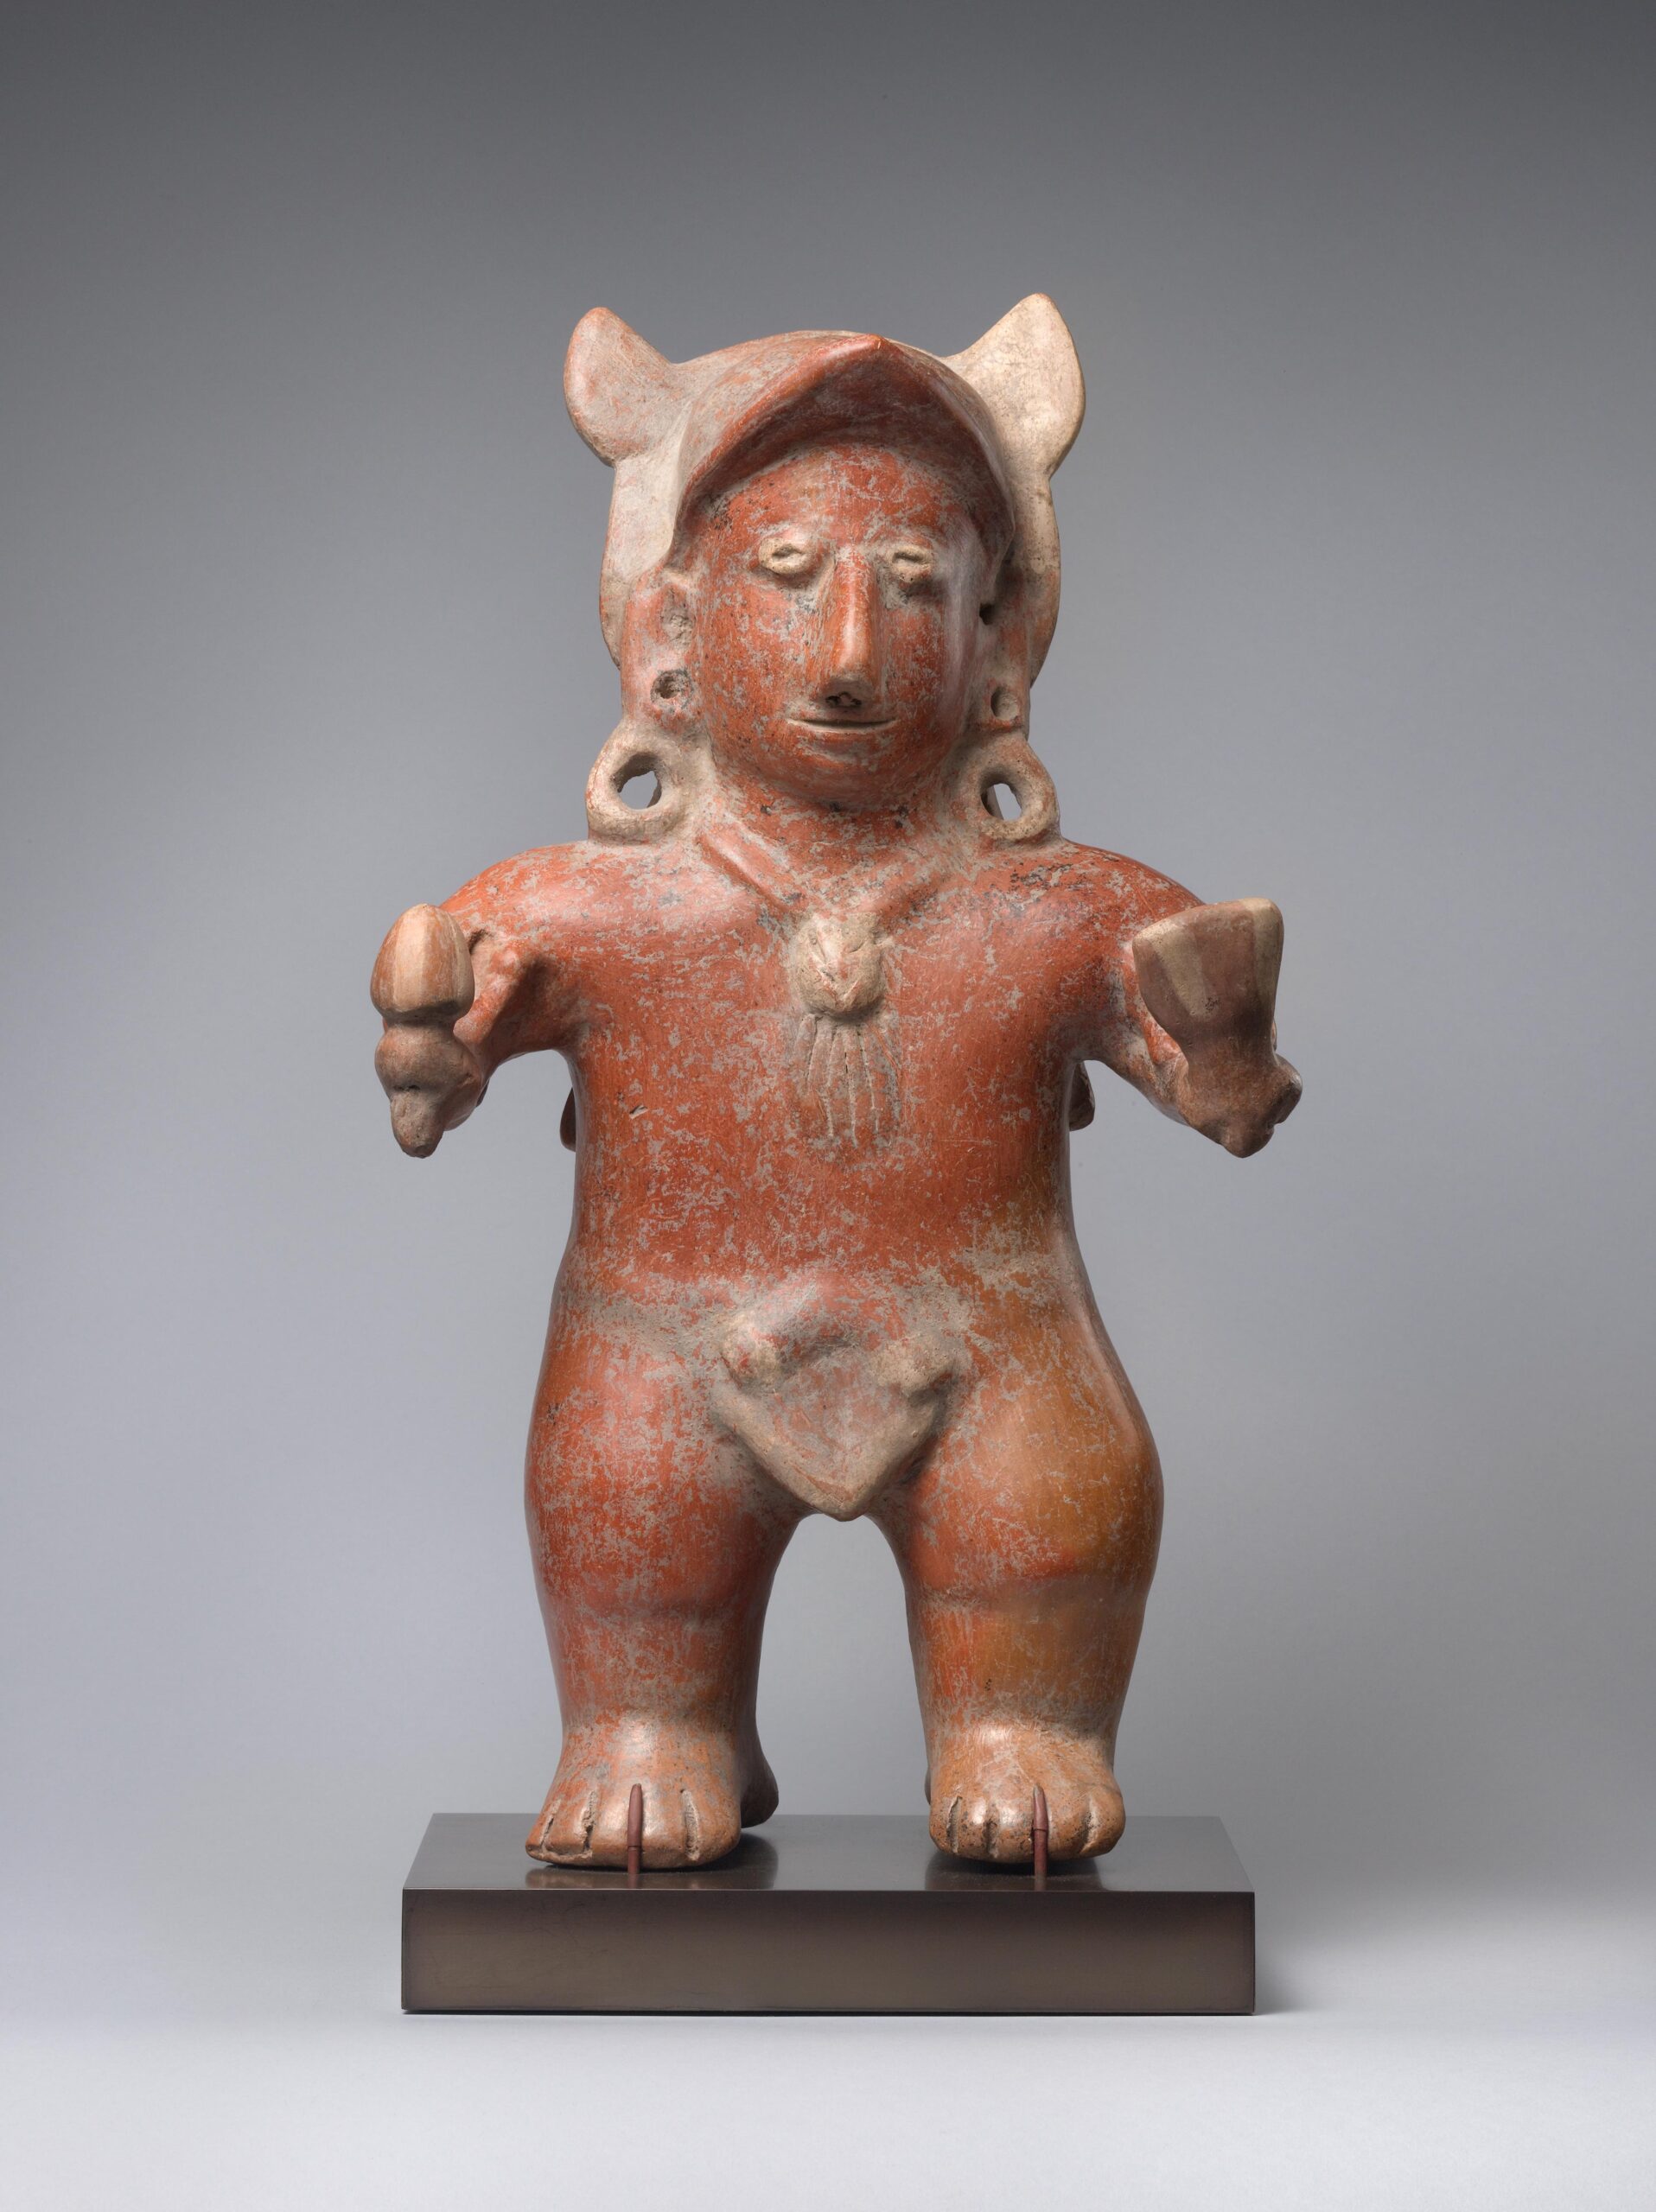 A ceramic sculpture of a red figure wearing an animal head, loin cloth, and earrings, holding a rattle and a fan.